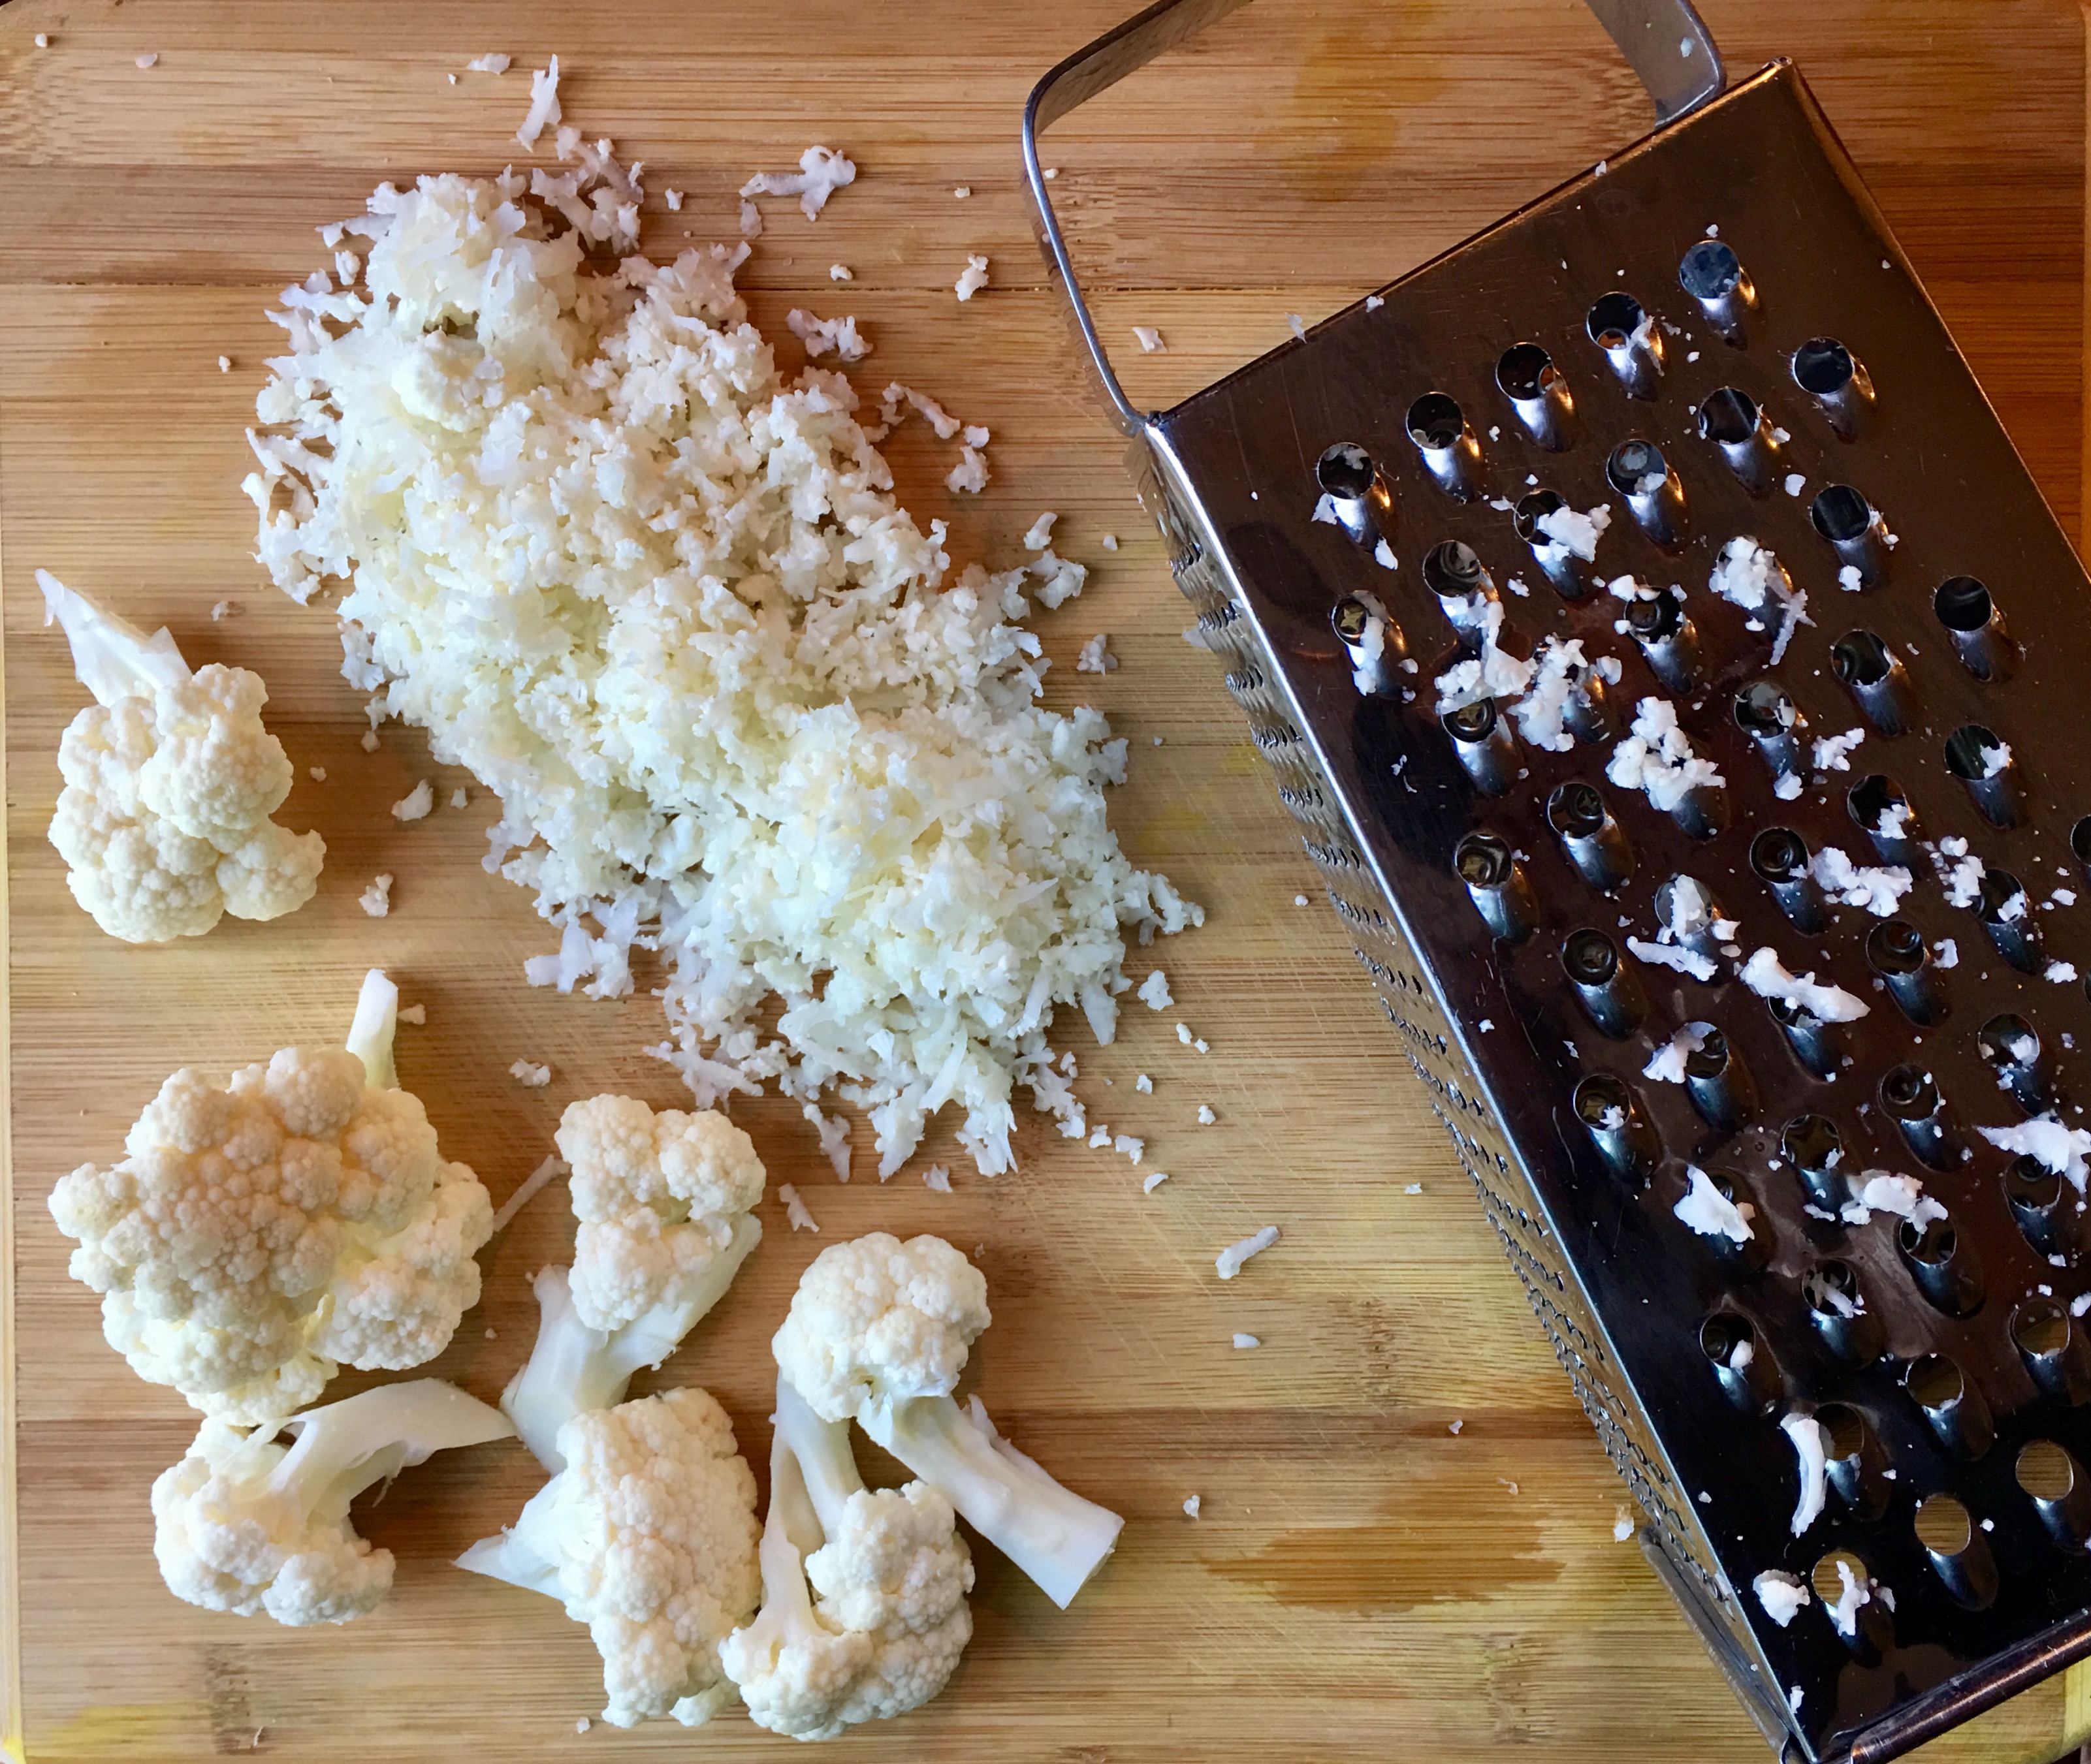 Cauliflower Rice is easy to make at home with a box grater!